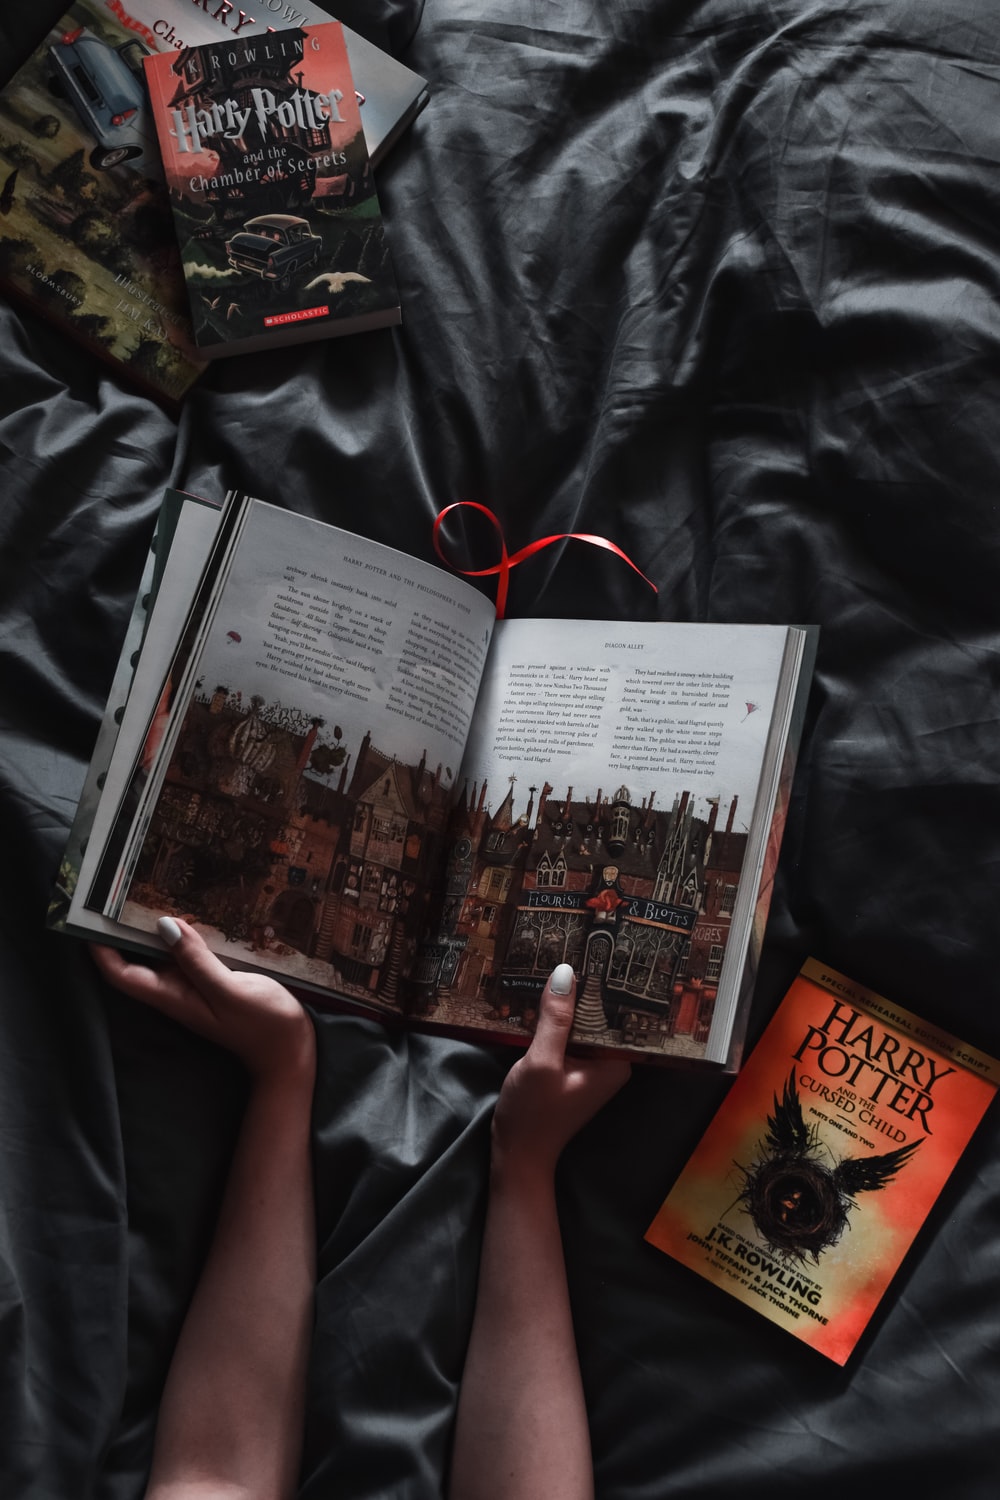 Harry Potter Books Wallpapers